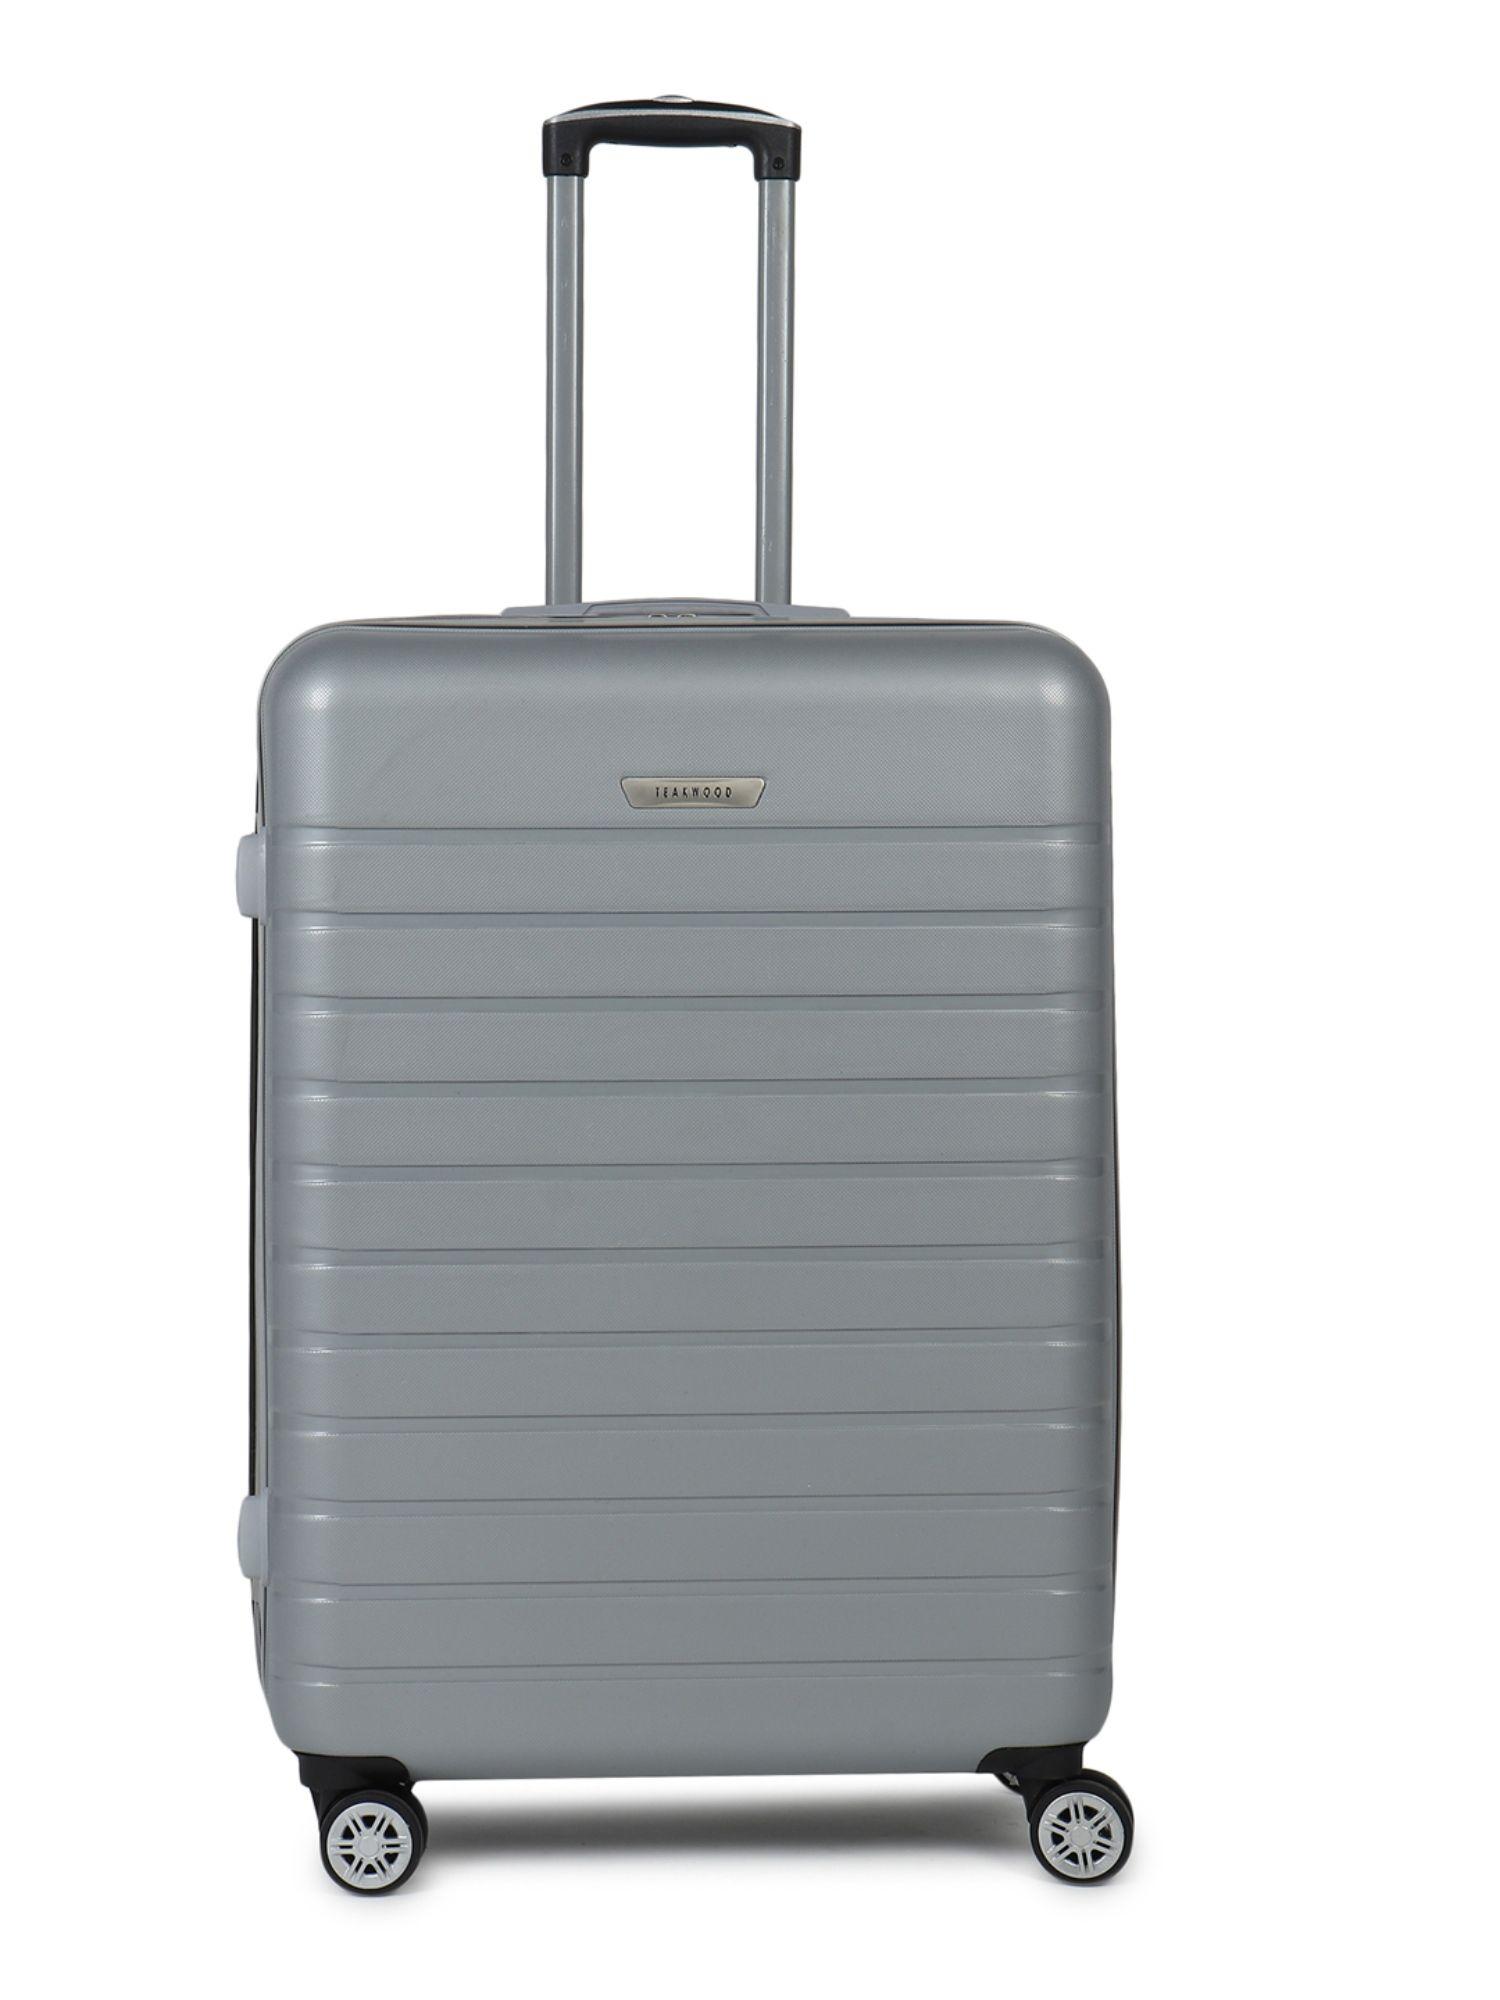 unisex-silver-textured-hard-sided-large-size-check-in-trolley-bag